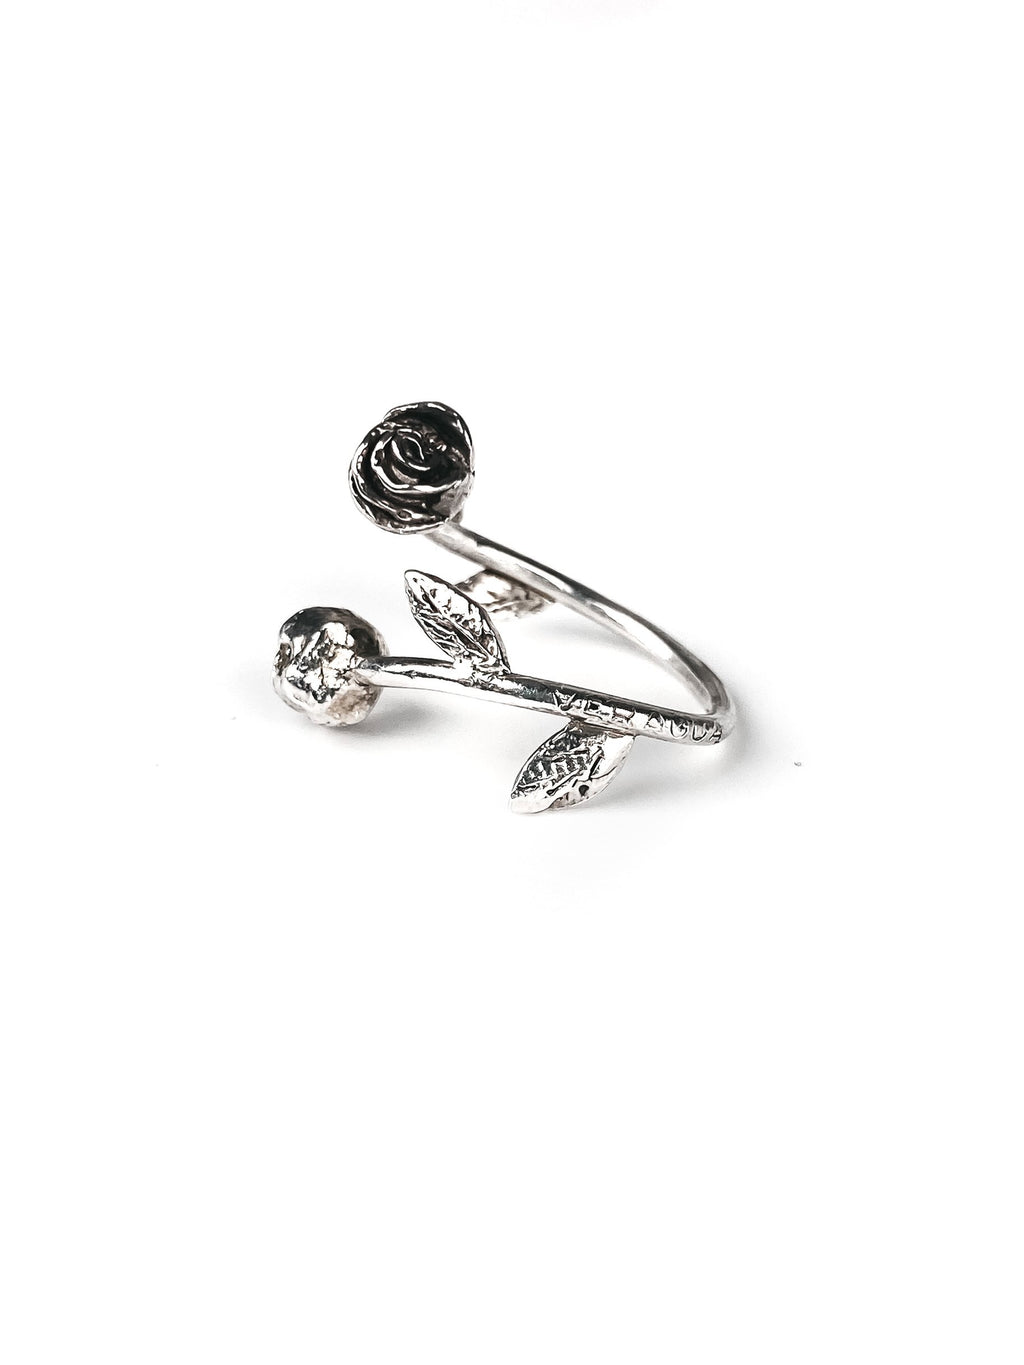 Double rose ring